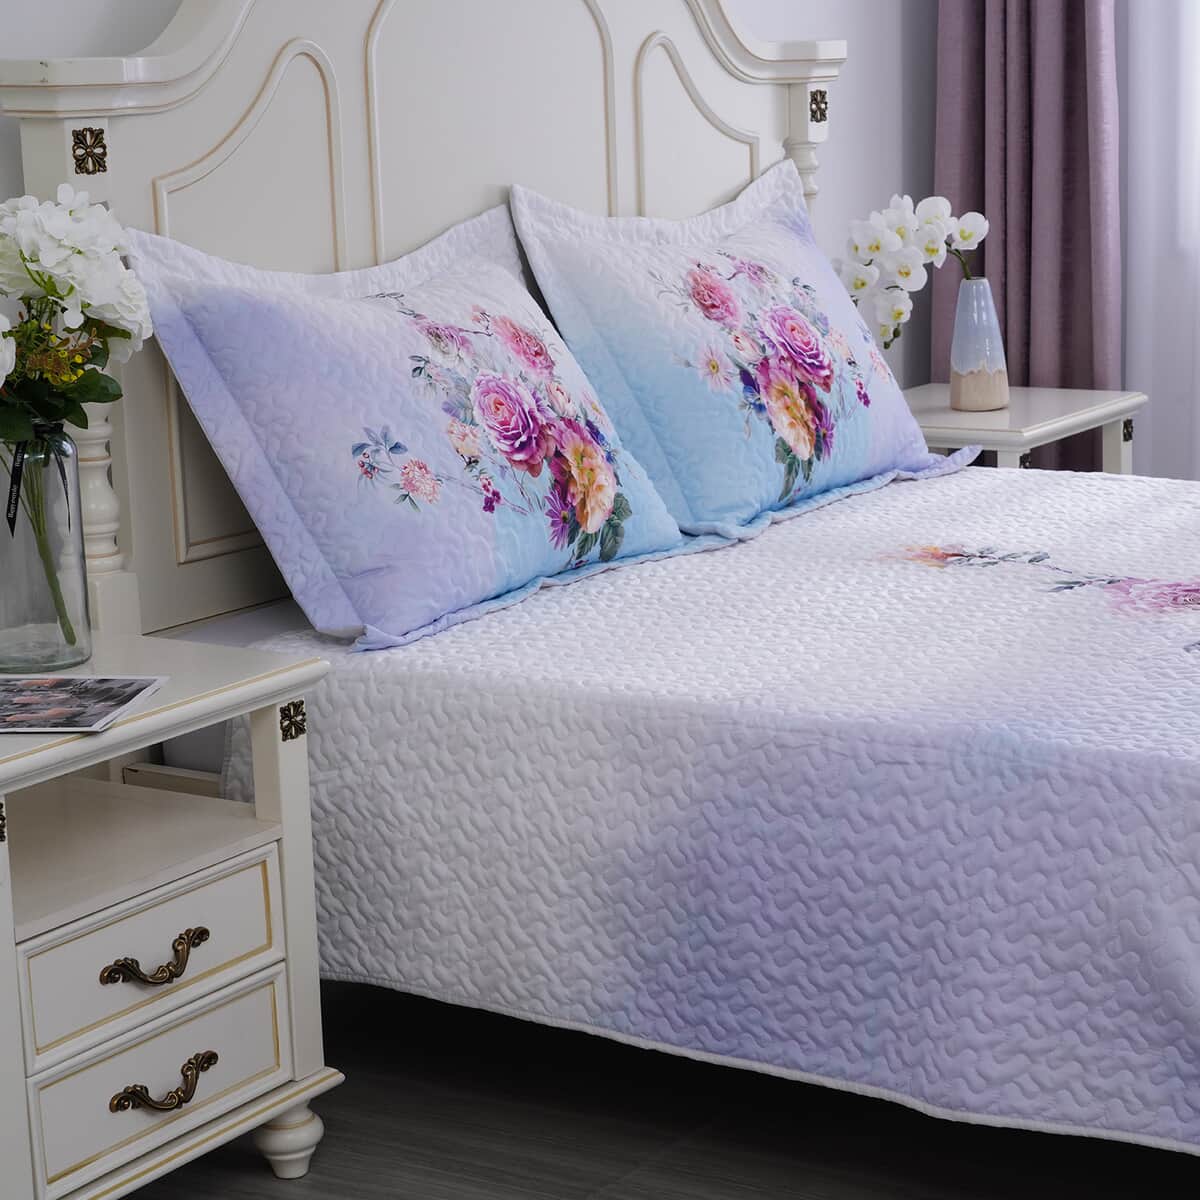 HOMESMART Peony Flower Digital Print 100% Microfiber Quilted Bedspread and 2 Pillow Shams - Queen image number 1